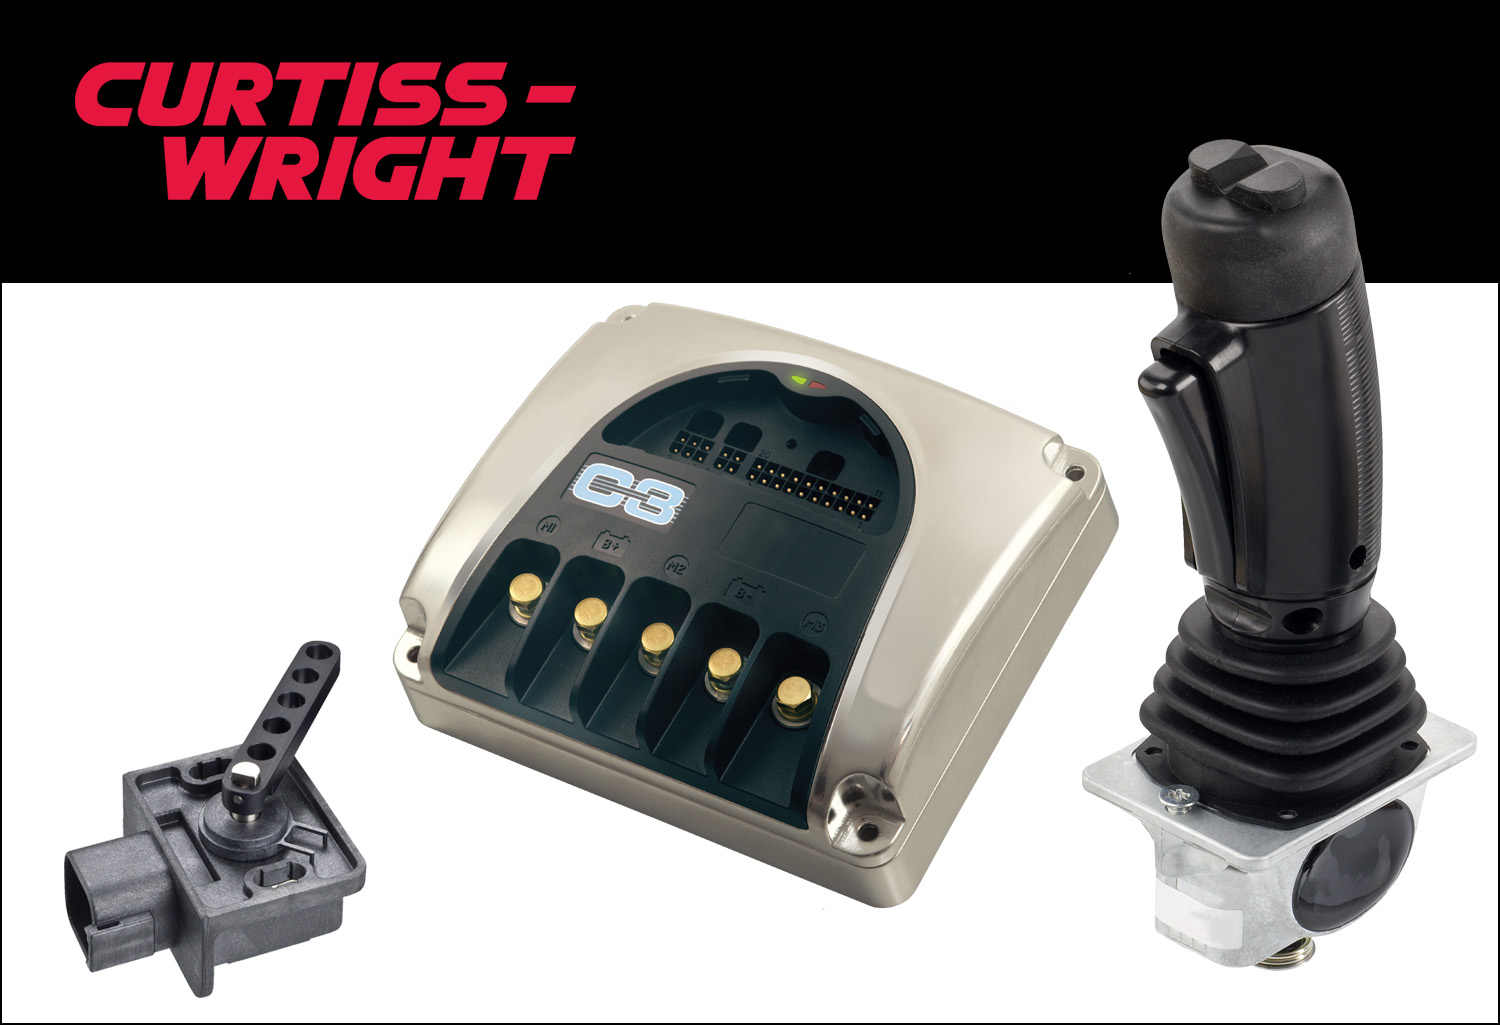 Brazil's GB Automotive Ltda has been appointed as distributor for Curtiss-Wright Corporation's Industrial division